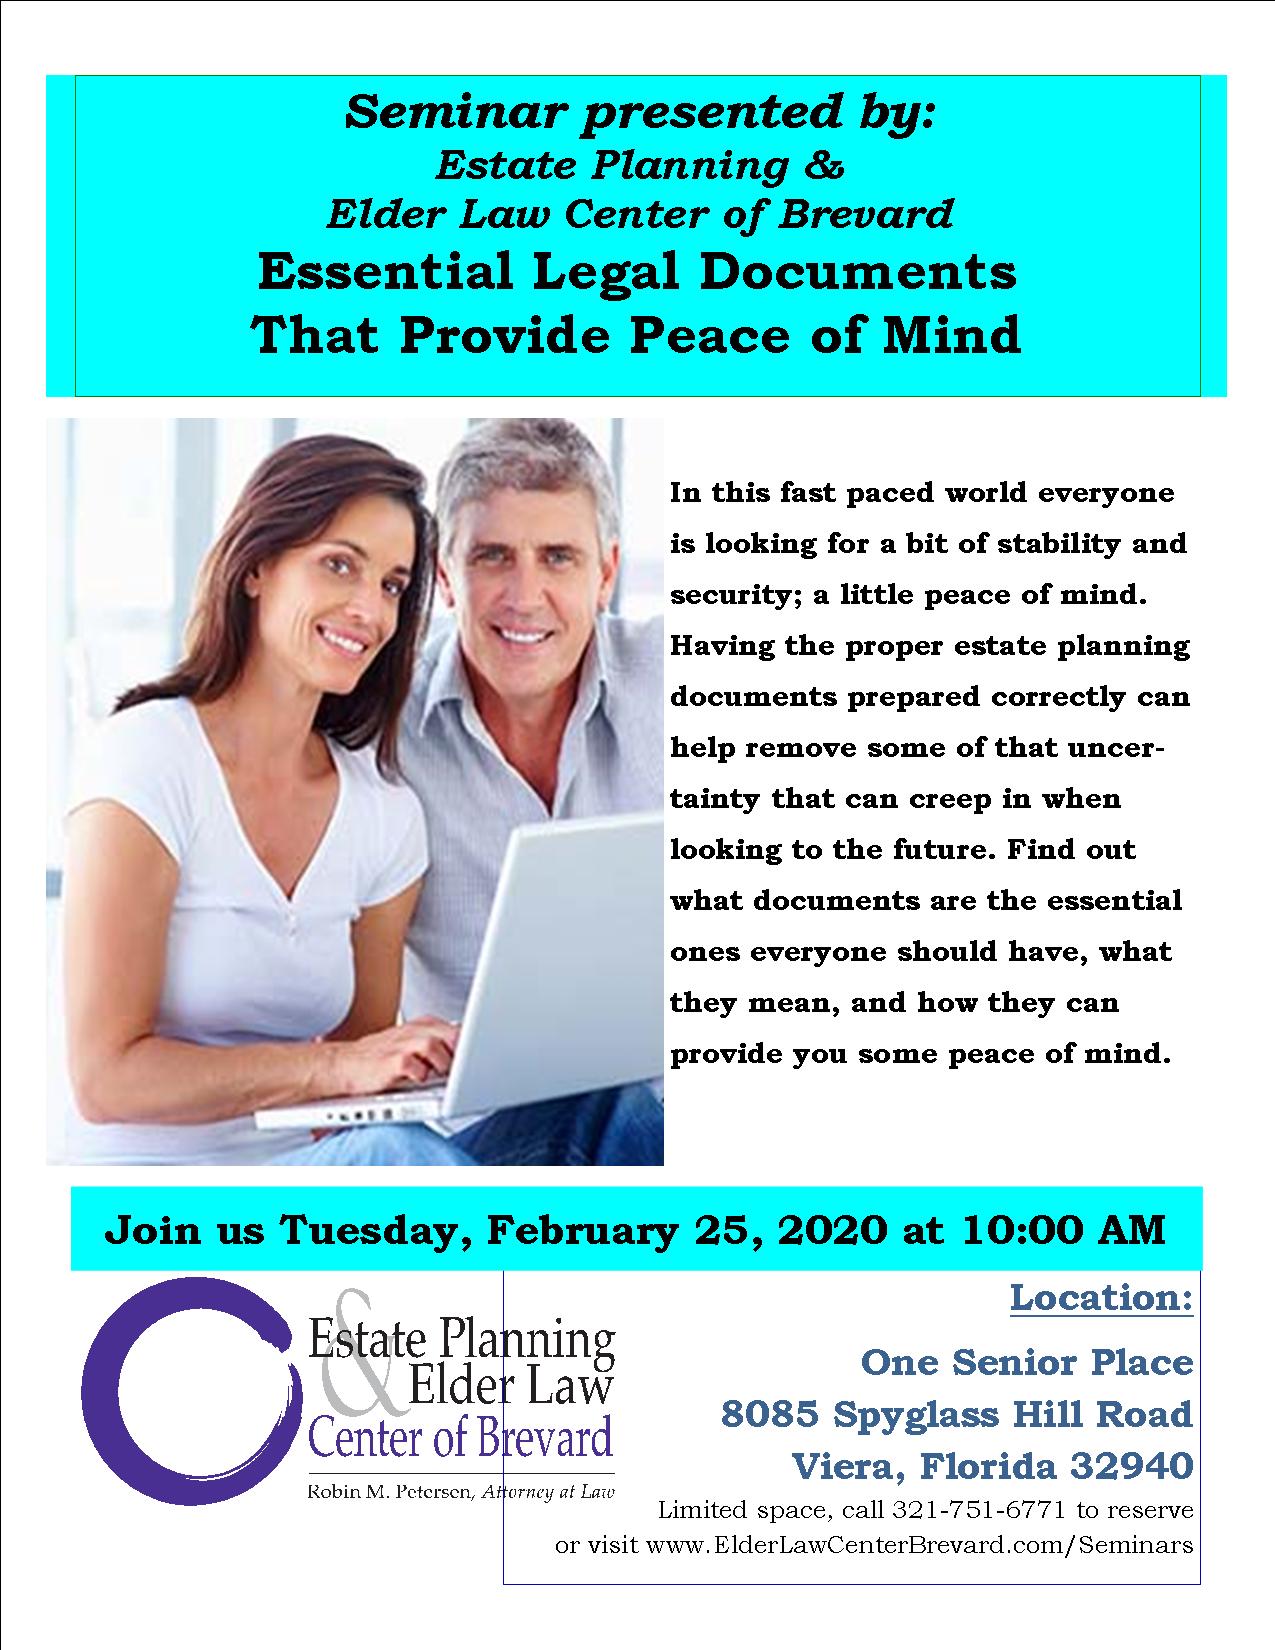 Essential Legal Documents That Provide Peace of Mind presented by Estate Planning and Elder Law Center of Brevard